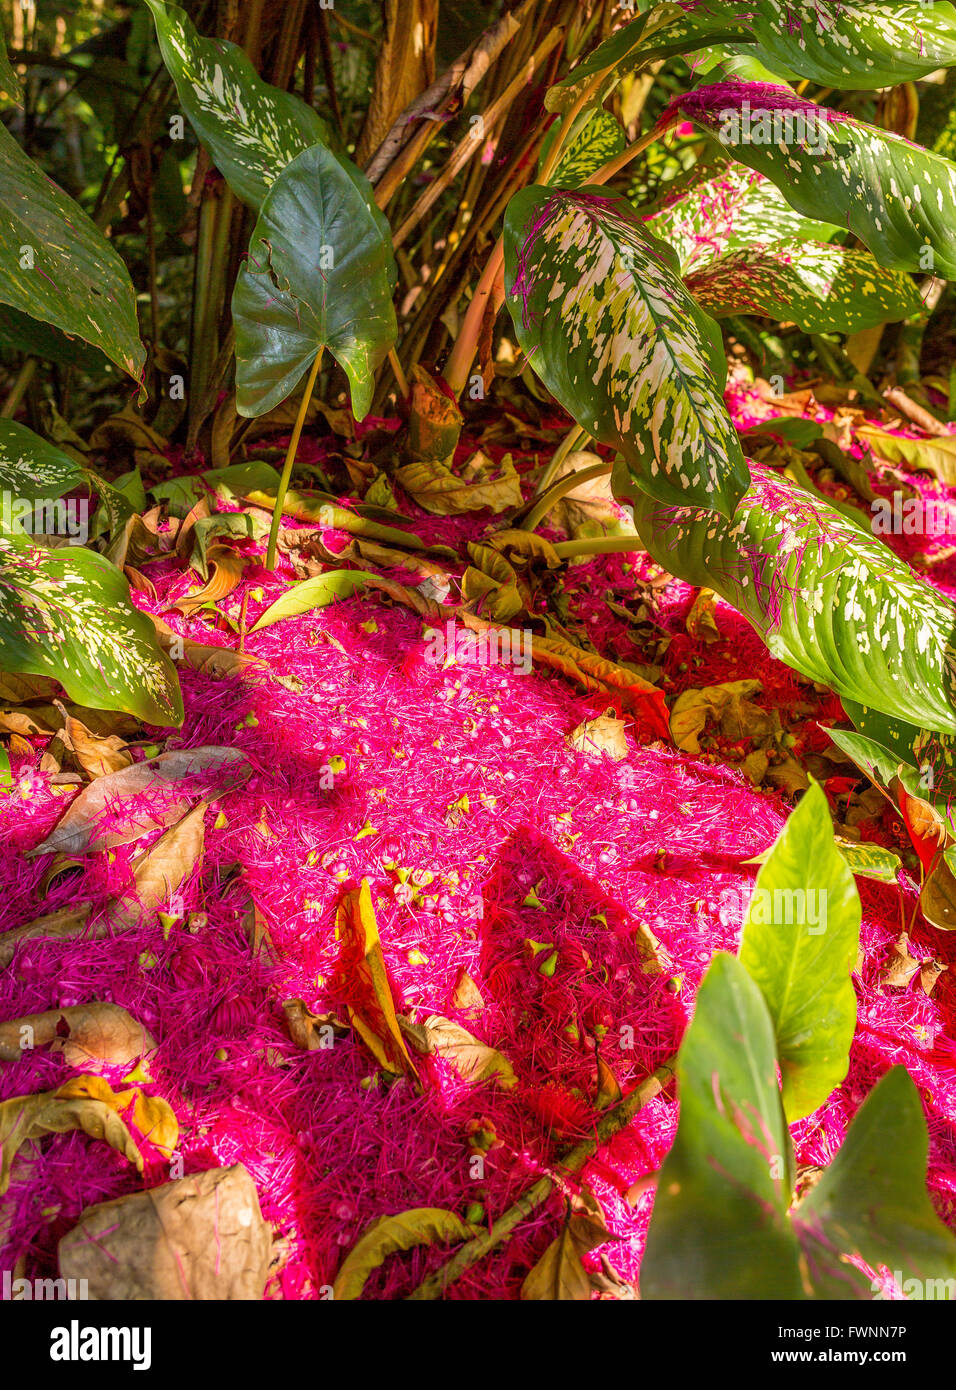 OSA PENINSULA, COSTA RICA - Tropical rain forest floor, with flower petals from the water apple tree. Syzygium malaccensis Stock Photo